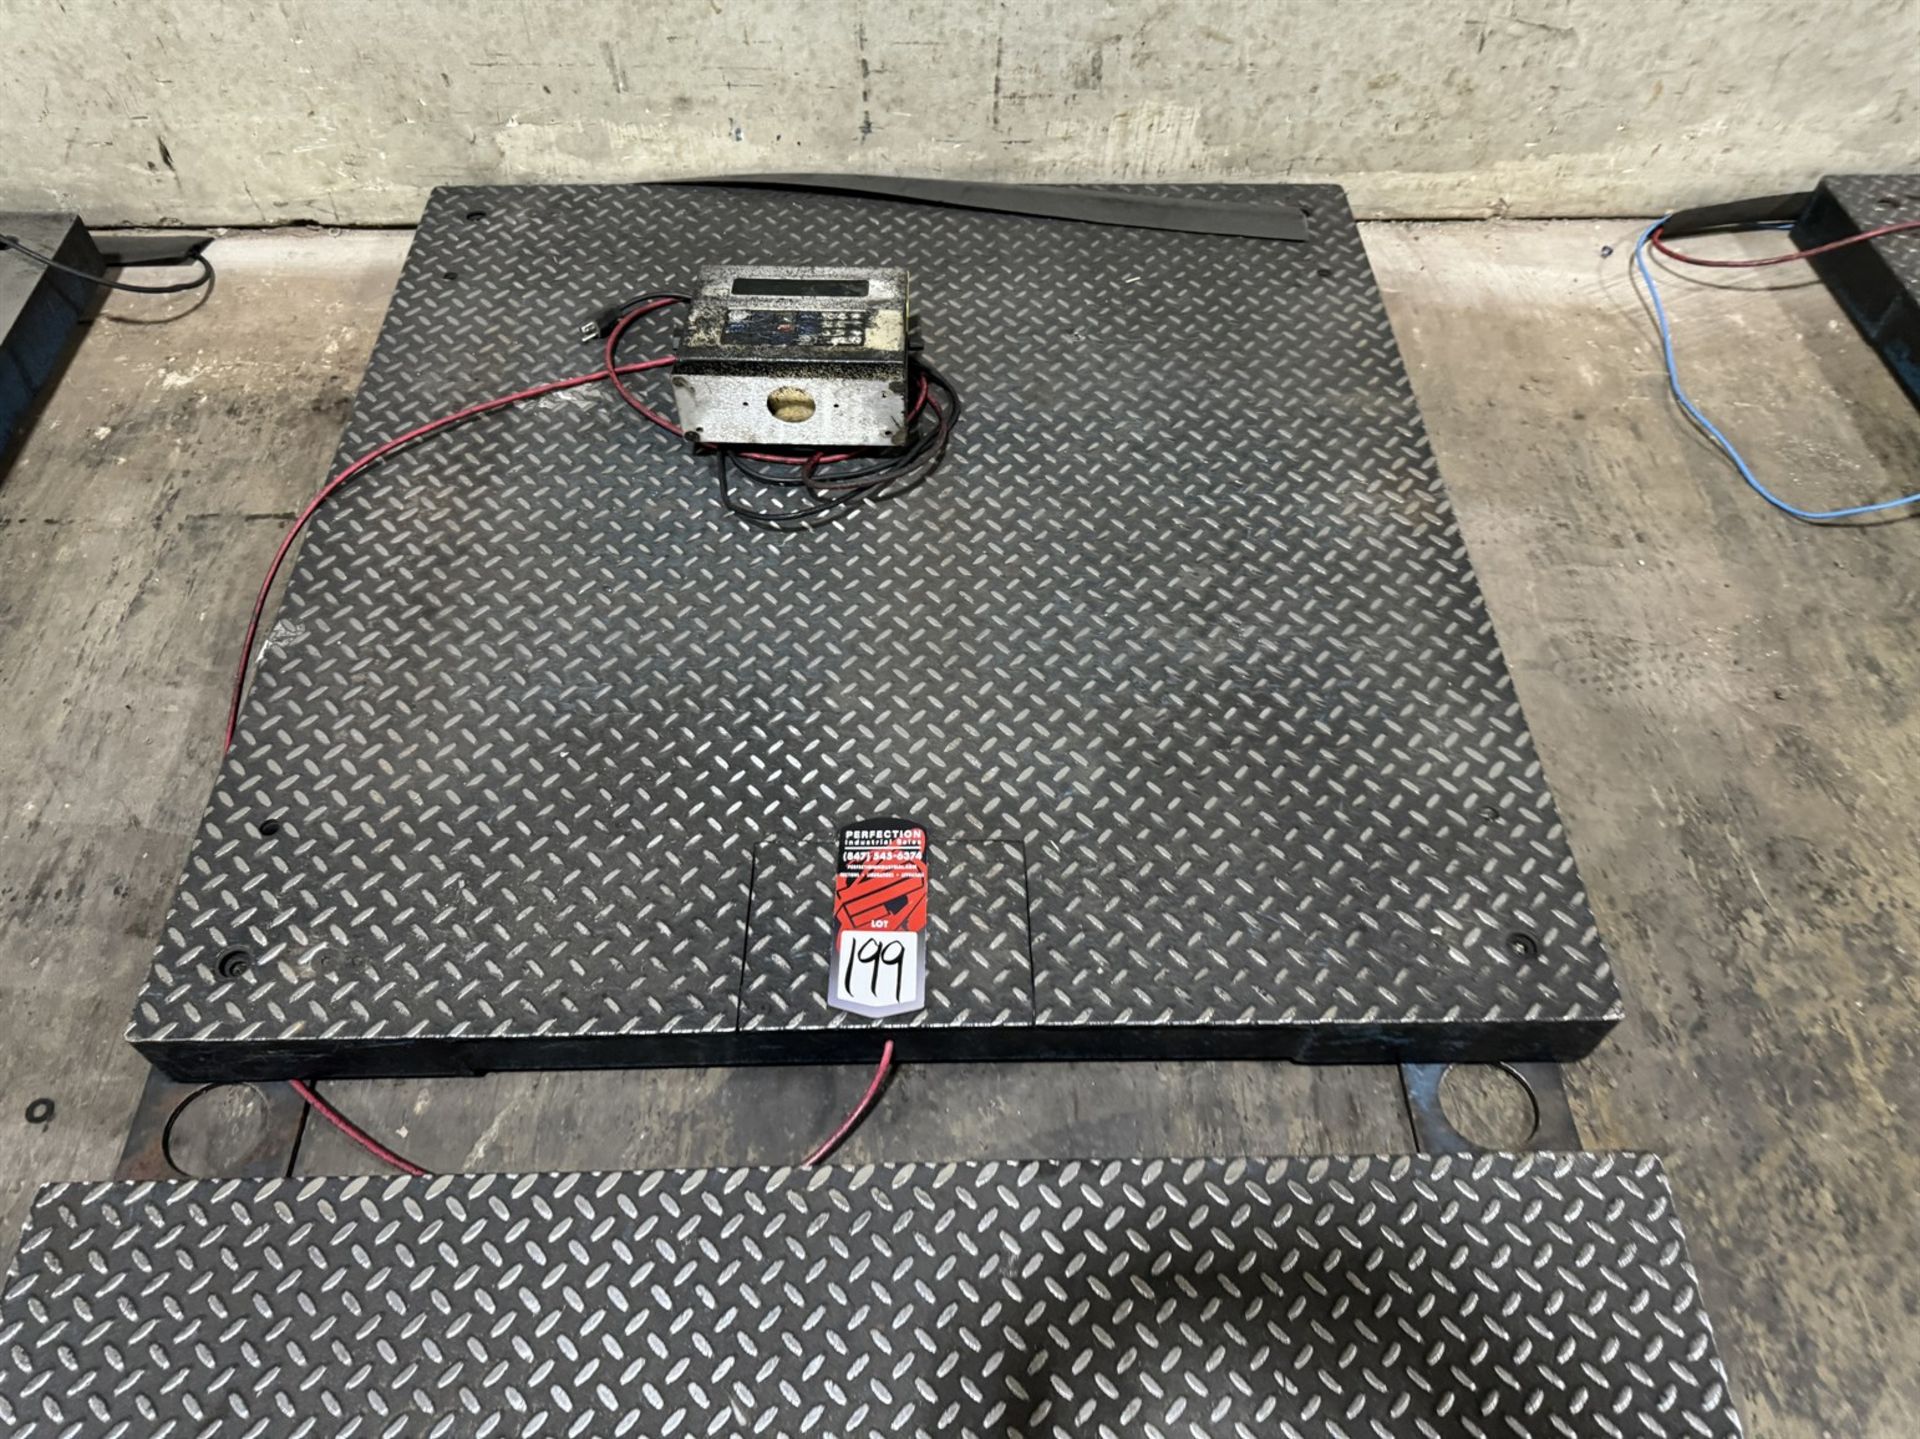 GSE 4' x 4' Floor Scale w/ Ramp and GSE 4600 Digital Scale, 5000 Lb. Capacity - Image 3 of 4